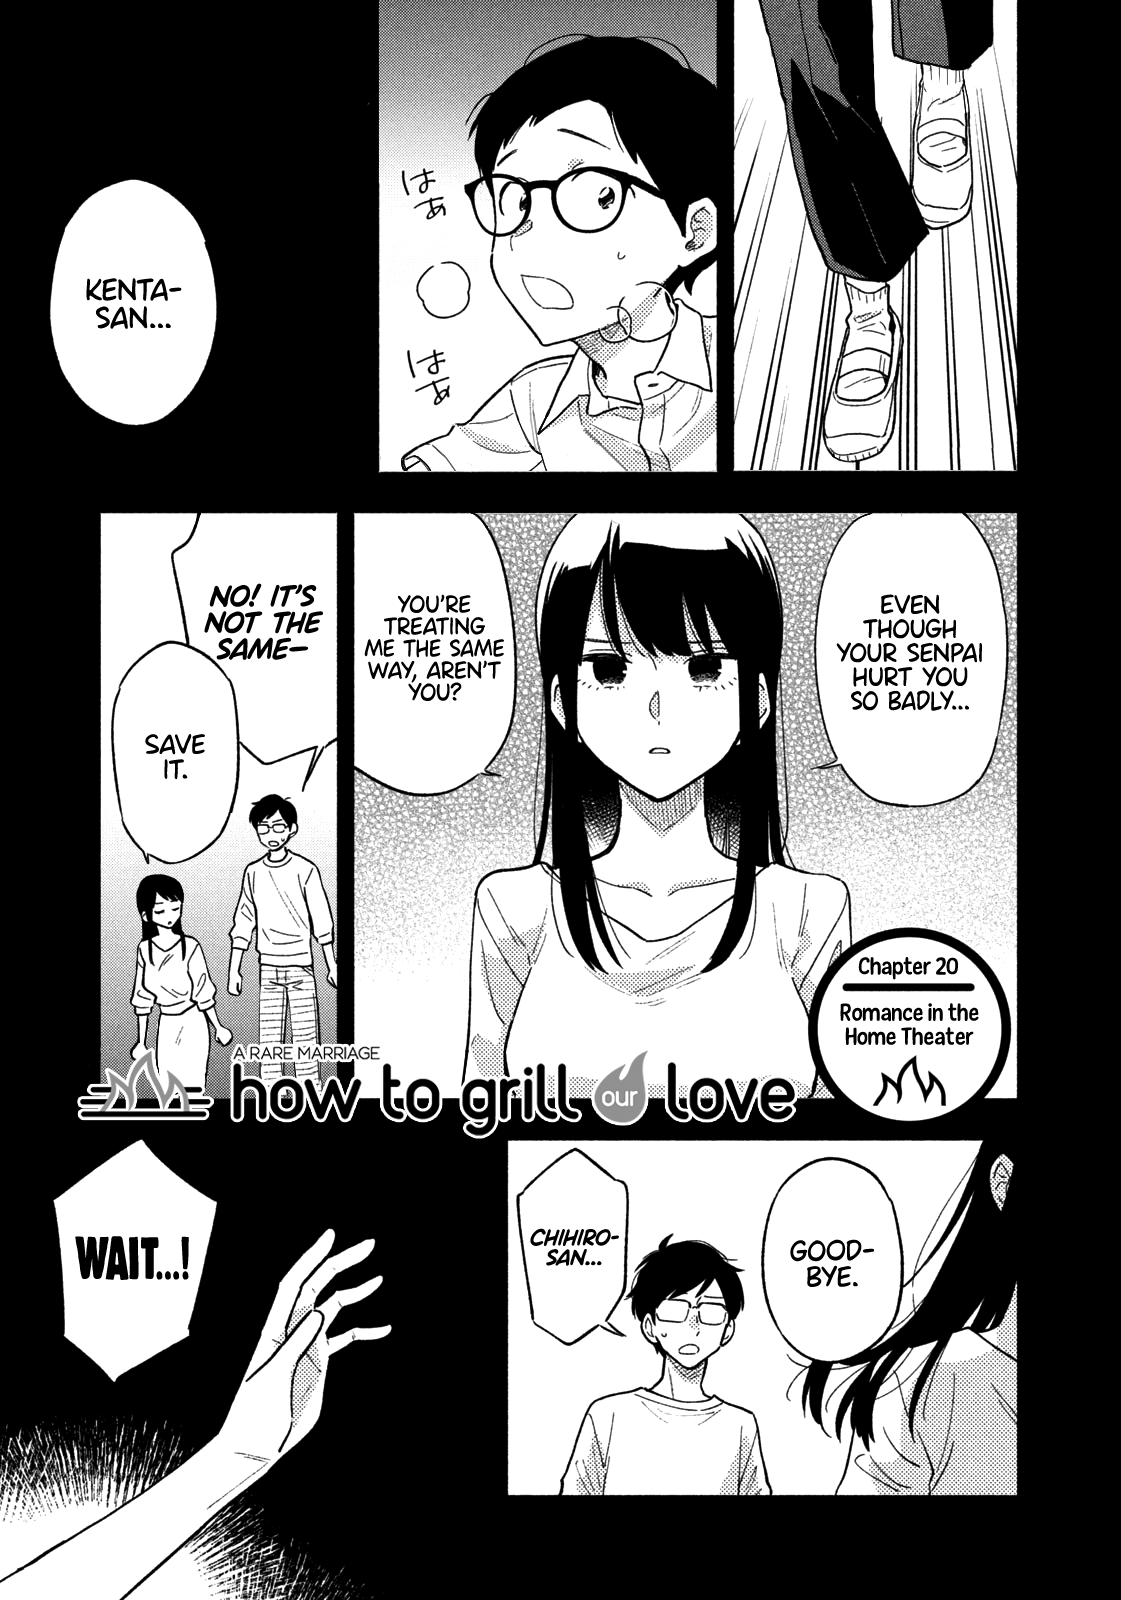 A Rare Marriage: How To Grill Our Love Chapter 20 #2